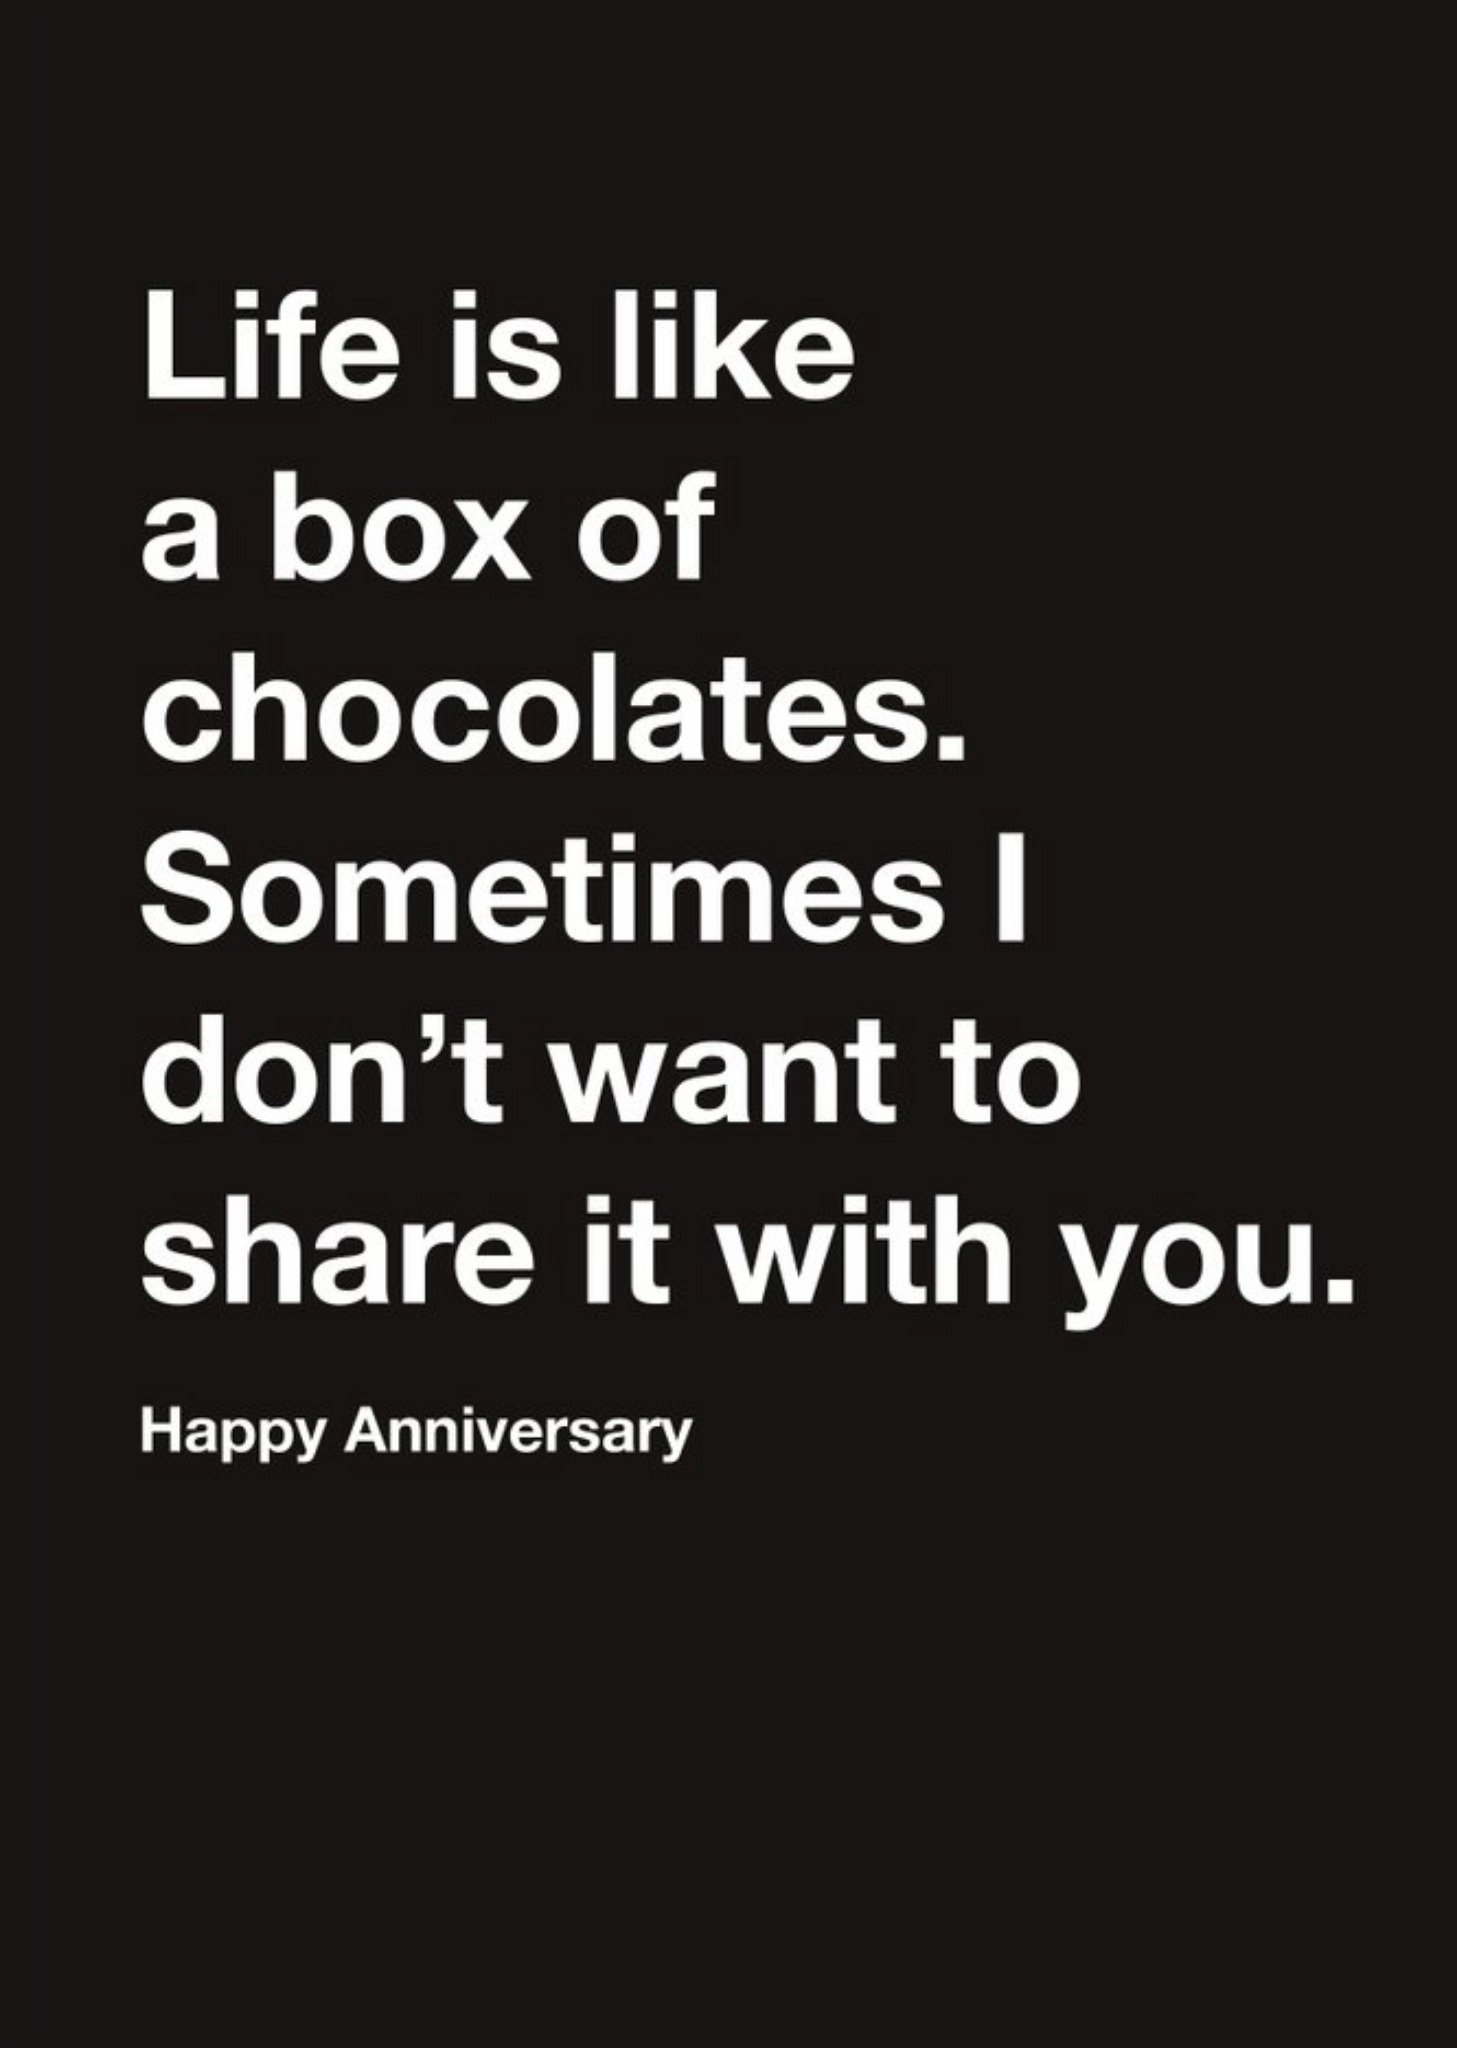 Moonpig Carte Blanche Life Is Like A Box Of Chocolates Humour Happy Anniversary Card, Large